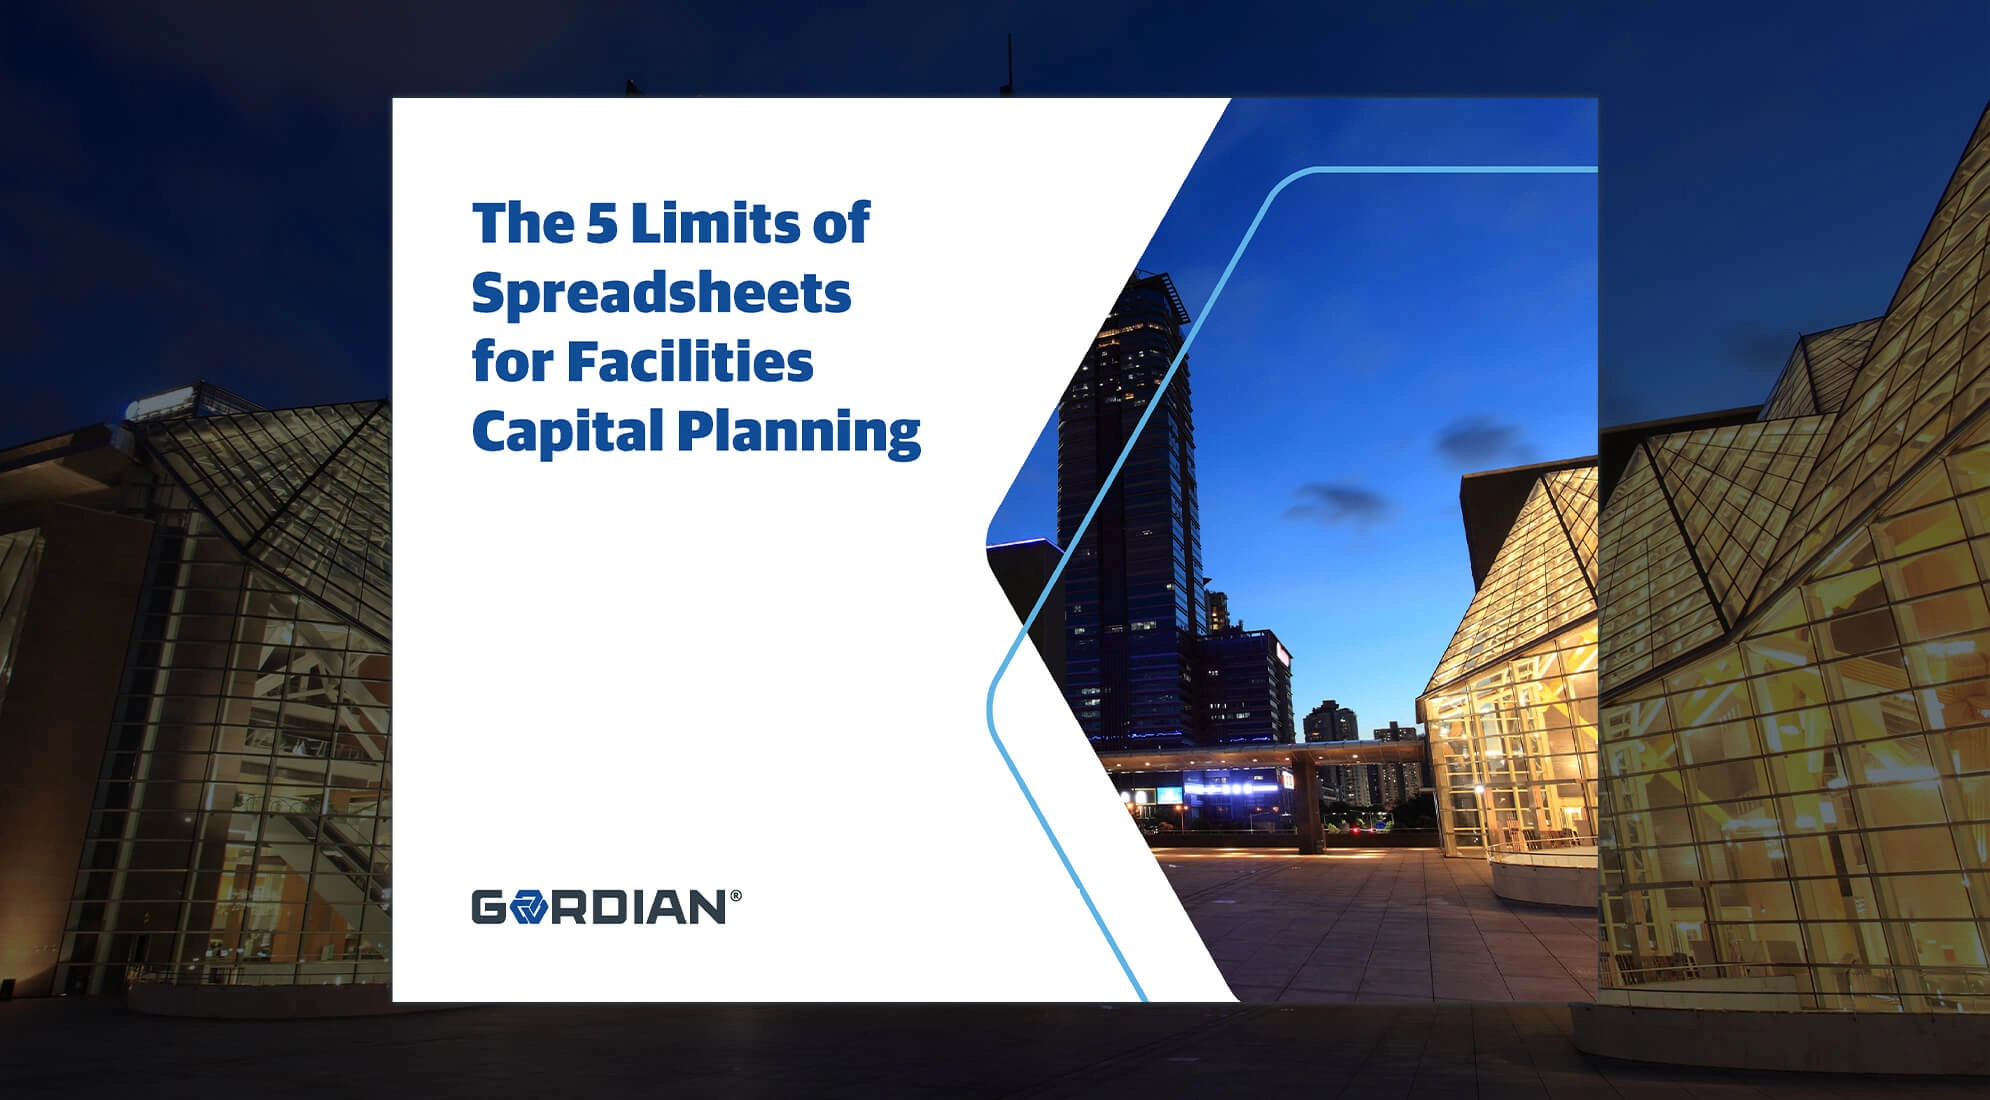 The 5 Limits of Spreadsheets for Facilities Capital Planning